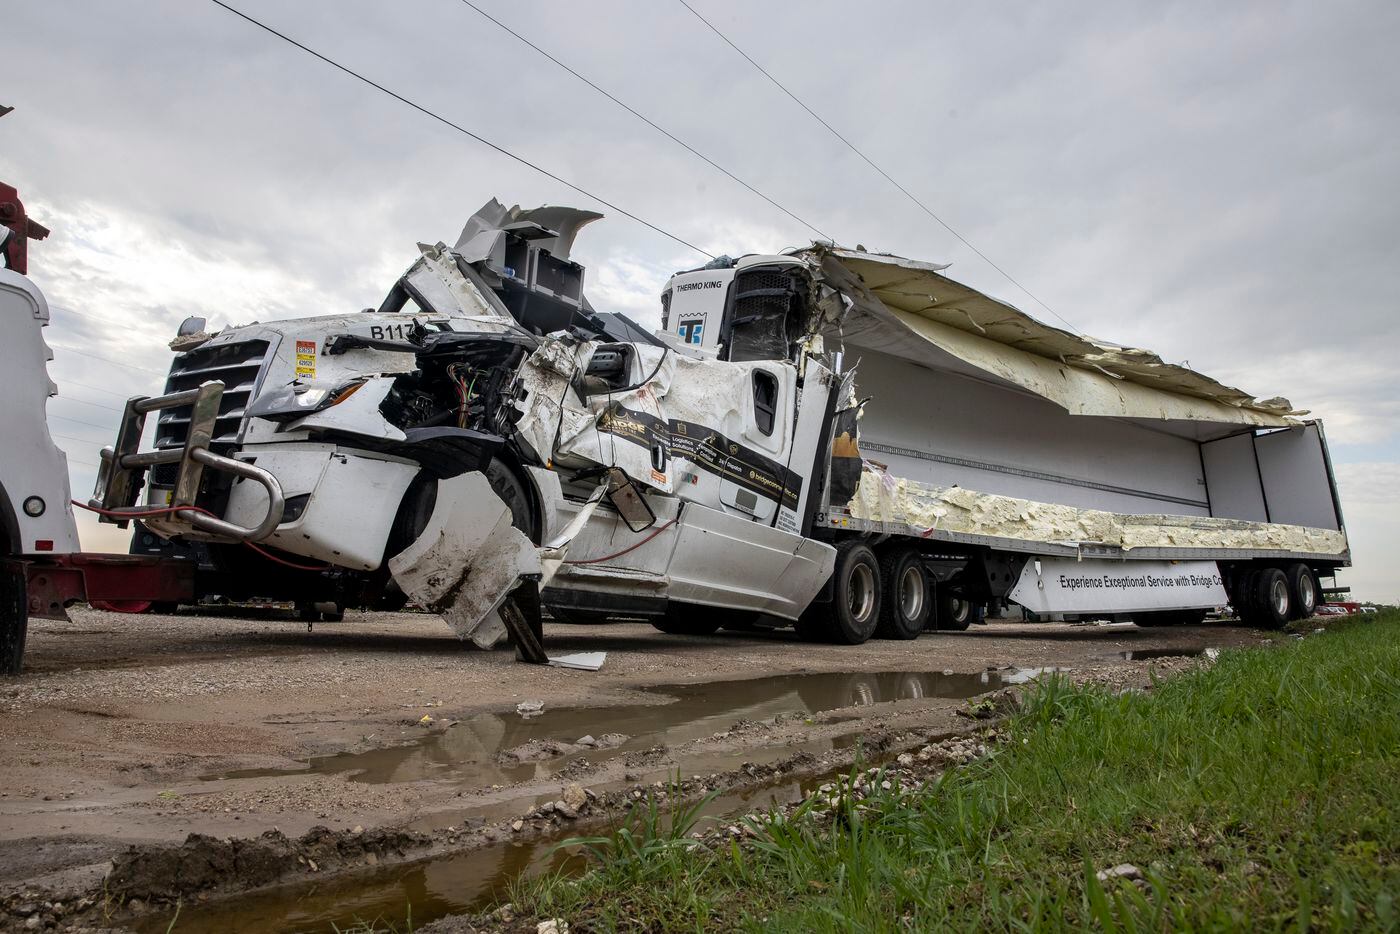 An 18-wheeler is hitched up to a tow truck after being damaged on Interstate 35 in the Monday night tornado that touched down just south of in Waxahachie, Texas, on Tuesday, May 4, 2021. (Lynda M. González/The Dallas Morning News)